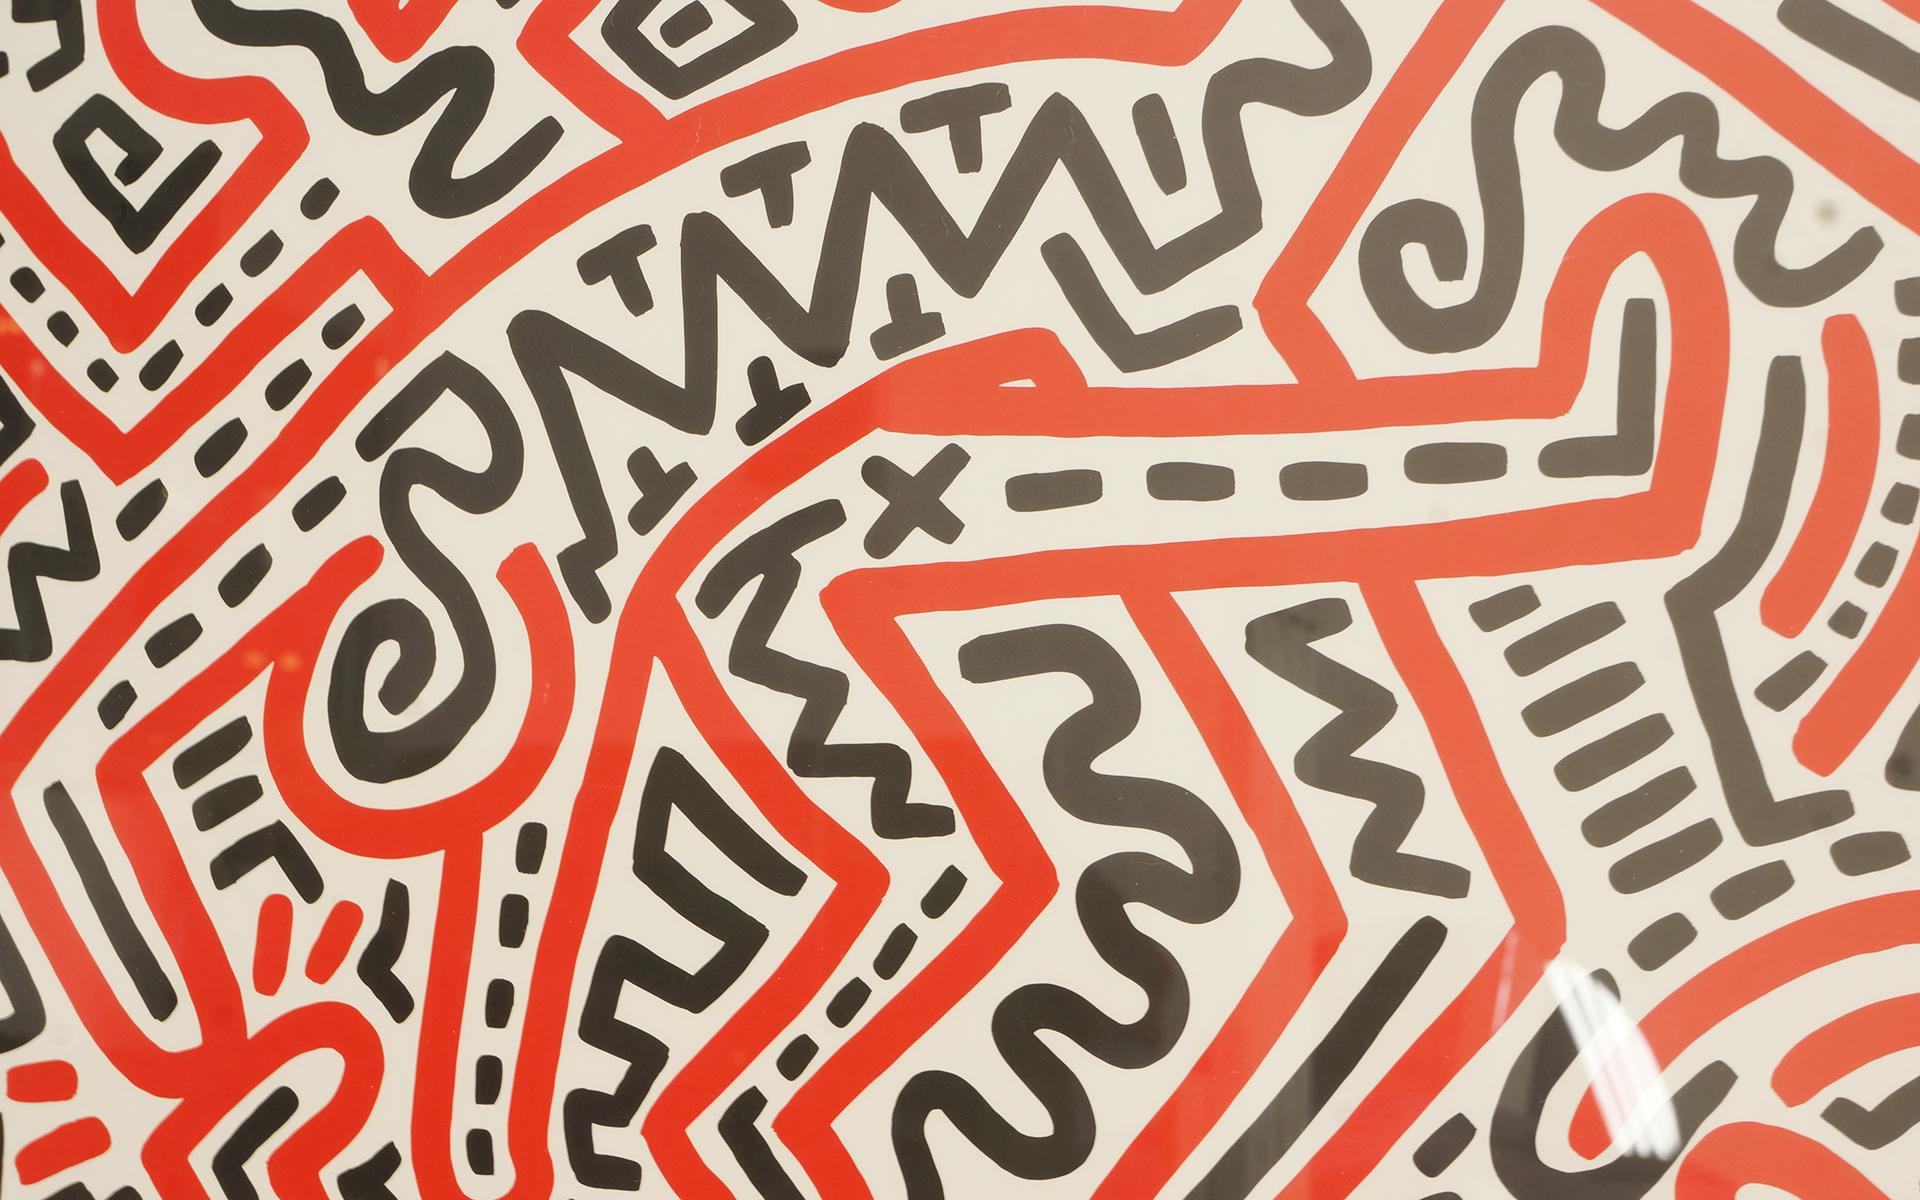 keith haring lithograph signed